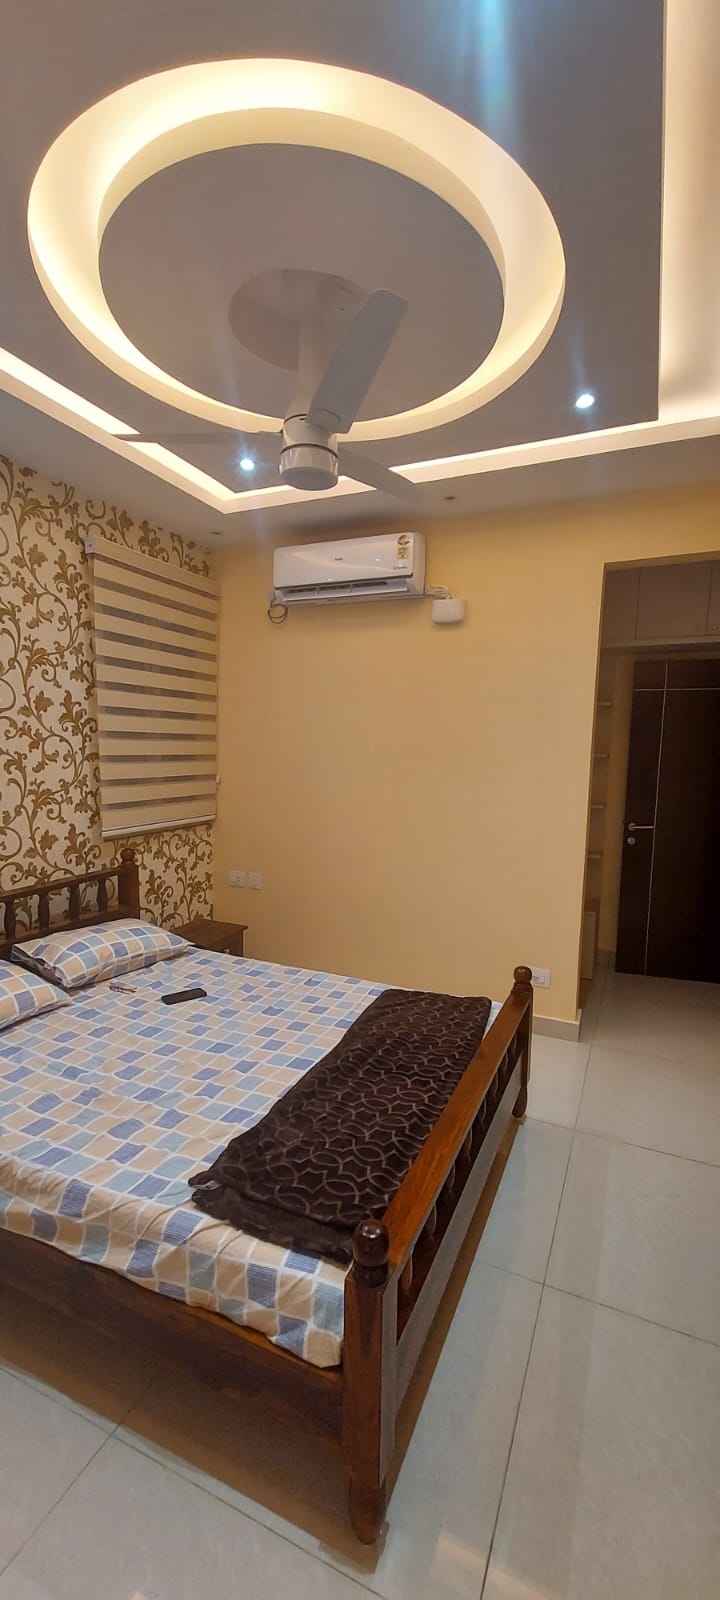 3 BHK Residential Apartment for Lease Only at JAML2 - 3300 in JP Nagar Layouts